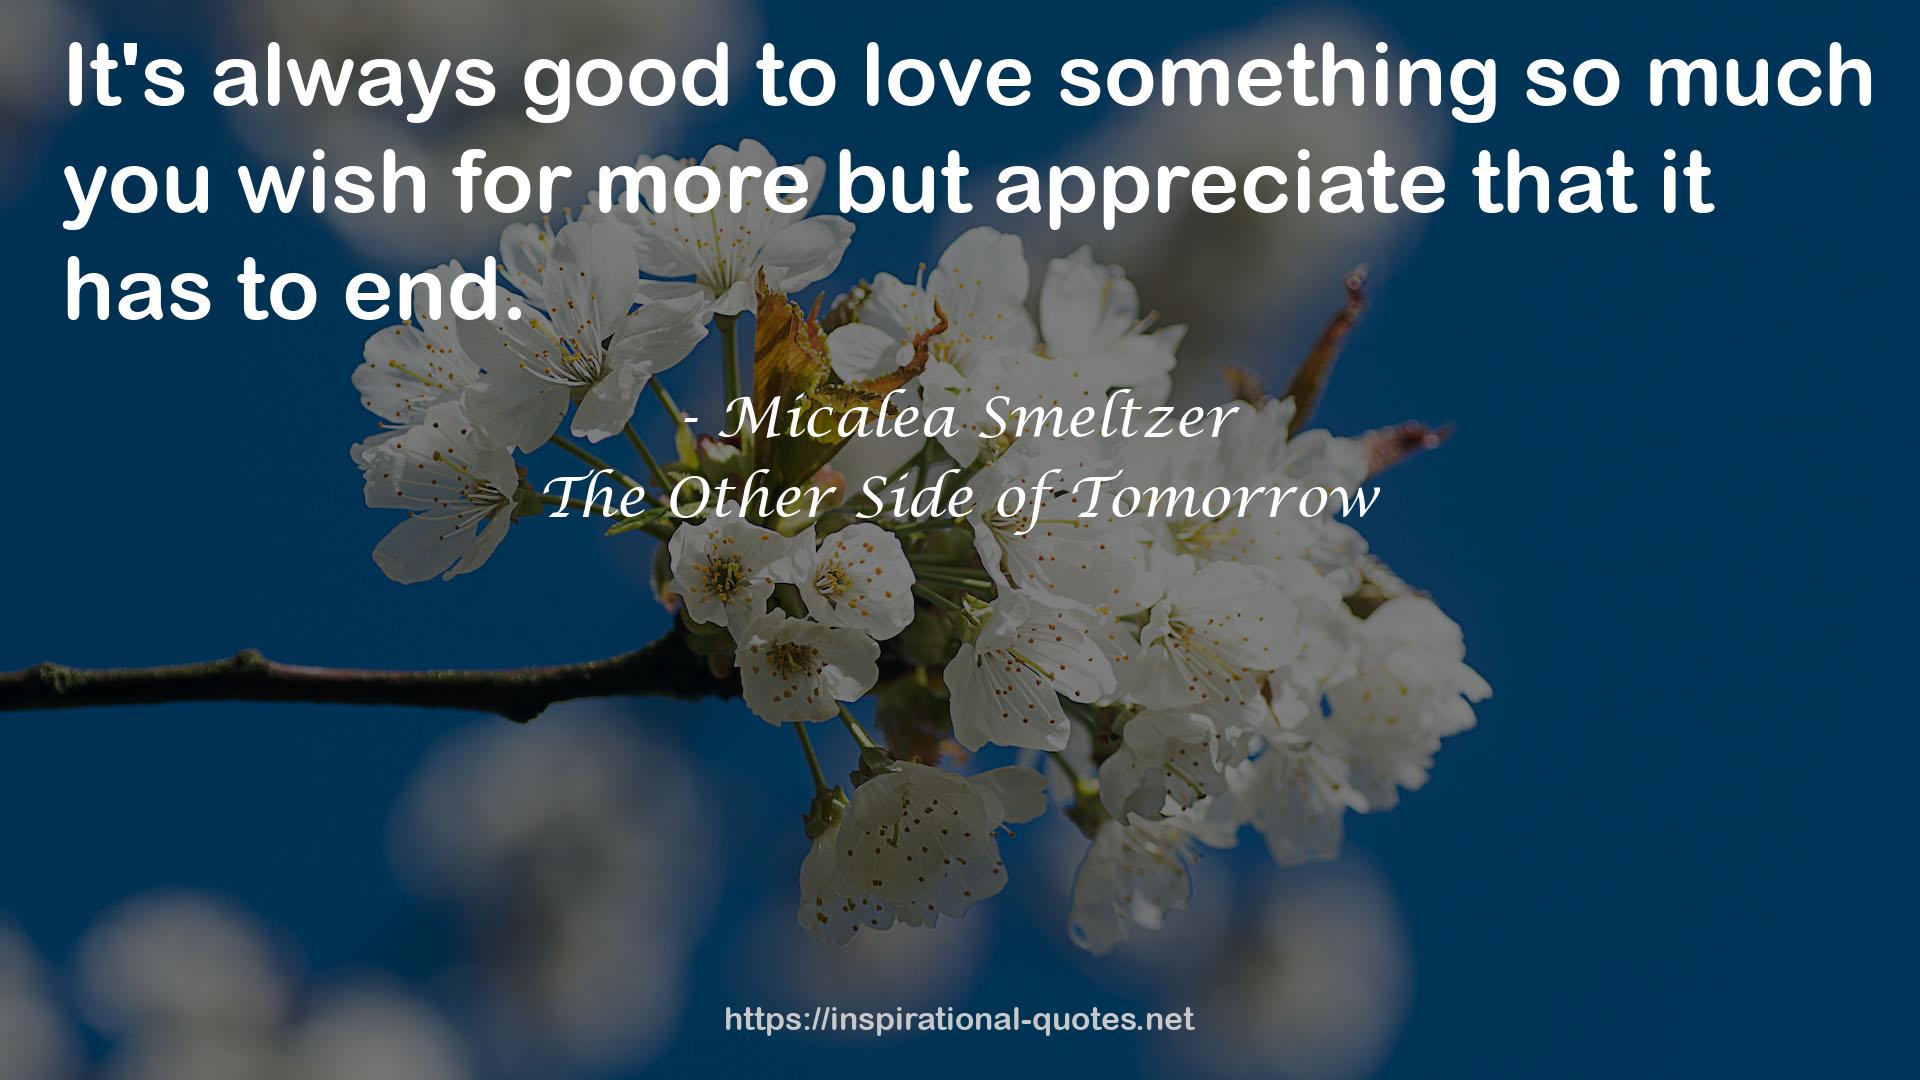 The Other Side of Tomorrow QUOTES